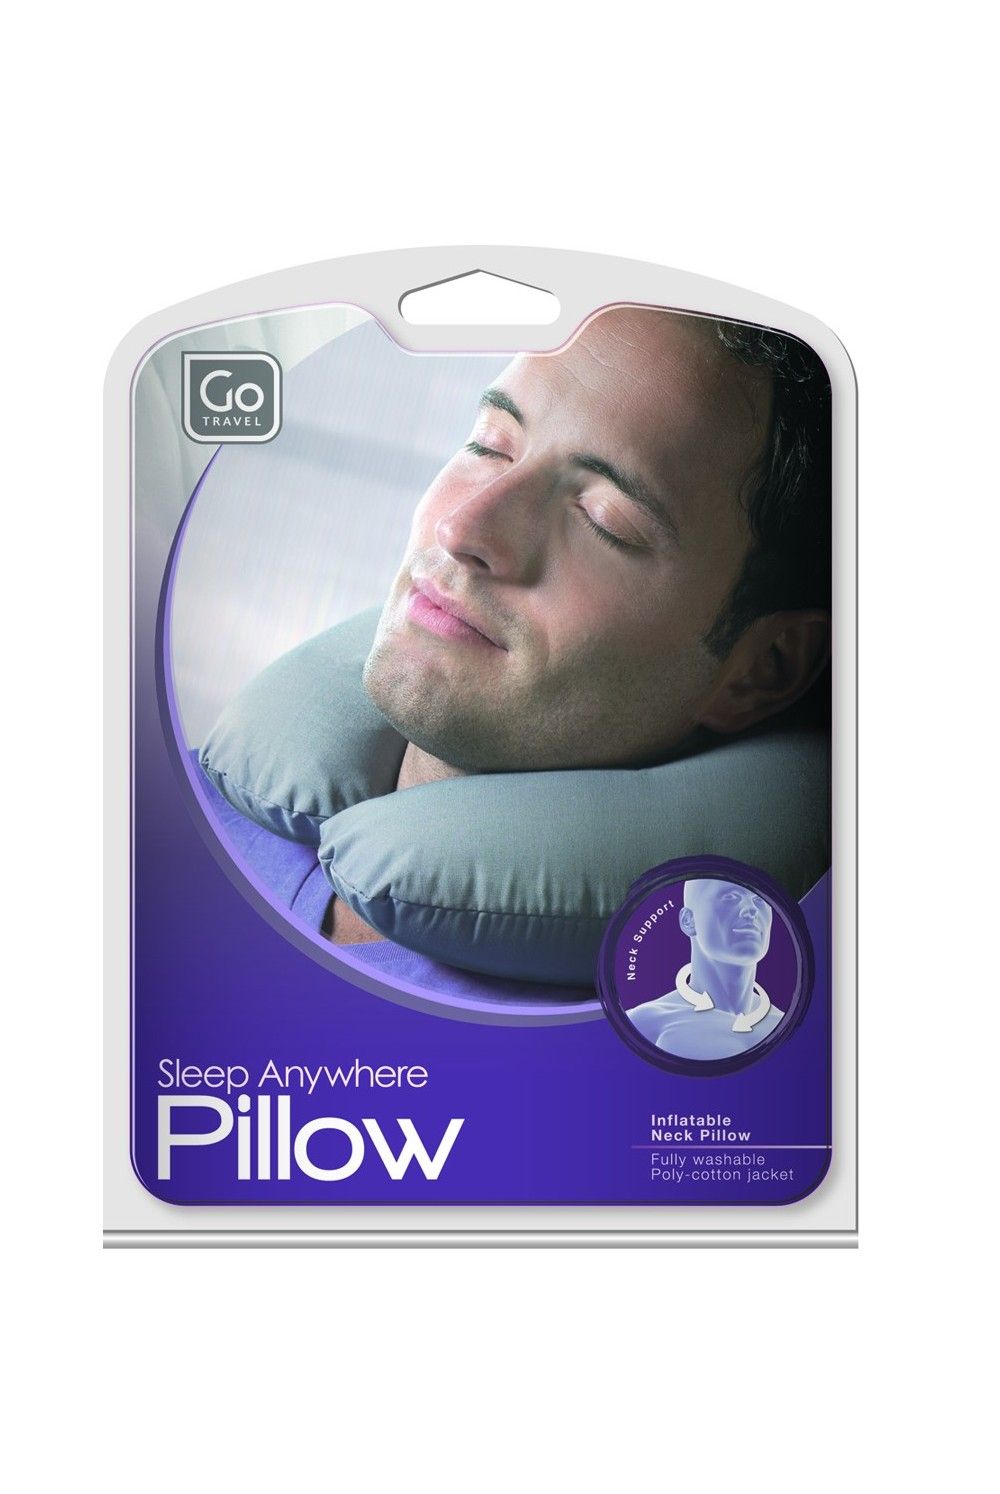 Go Travel Inflatable Neck Pillow